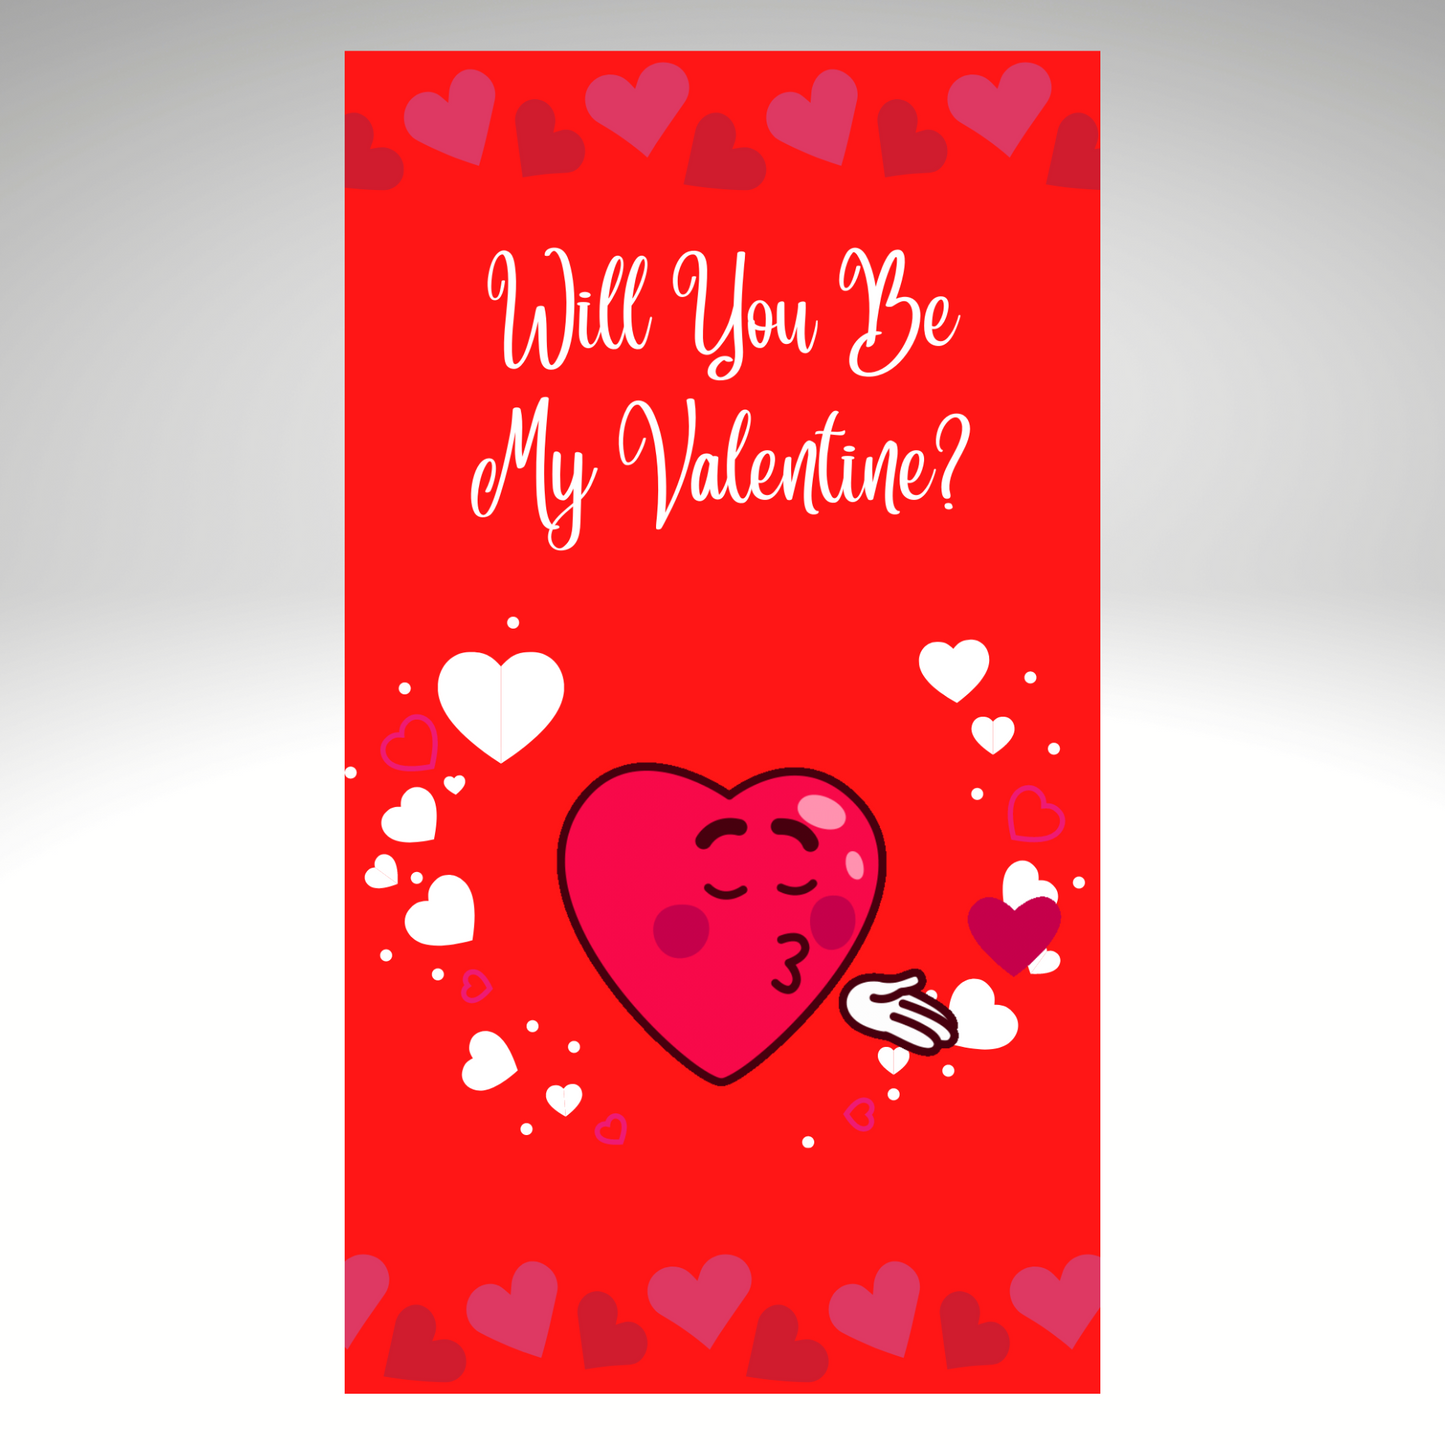 Valentines MP4 Video Message - Will You Be My Valentine? PNG